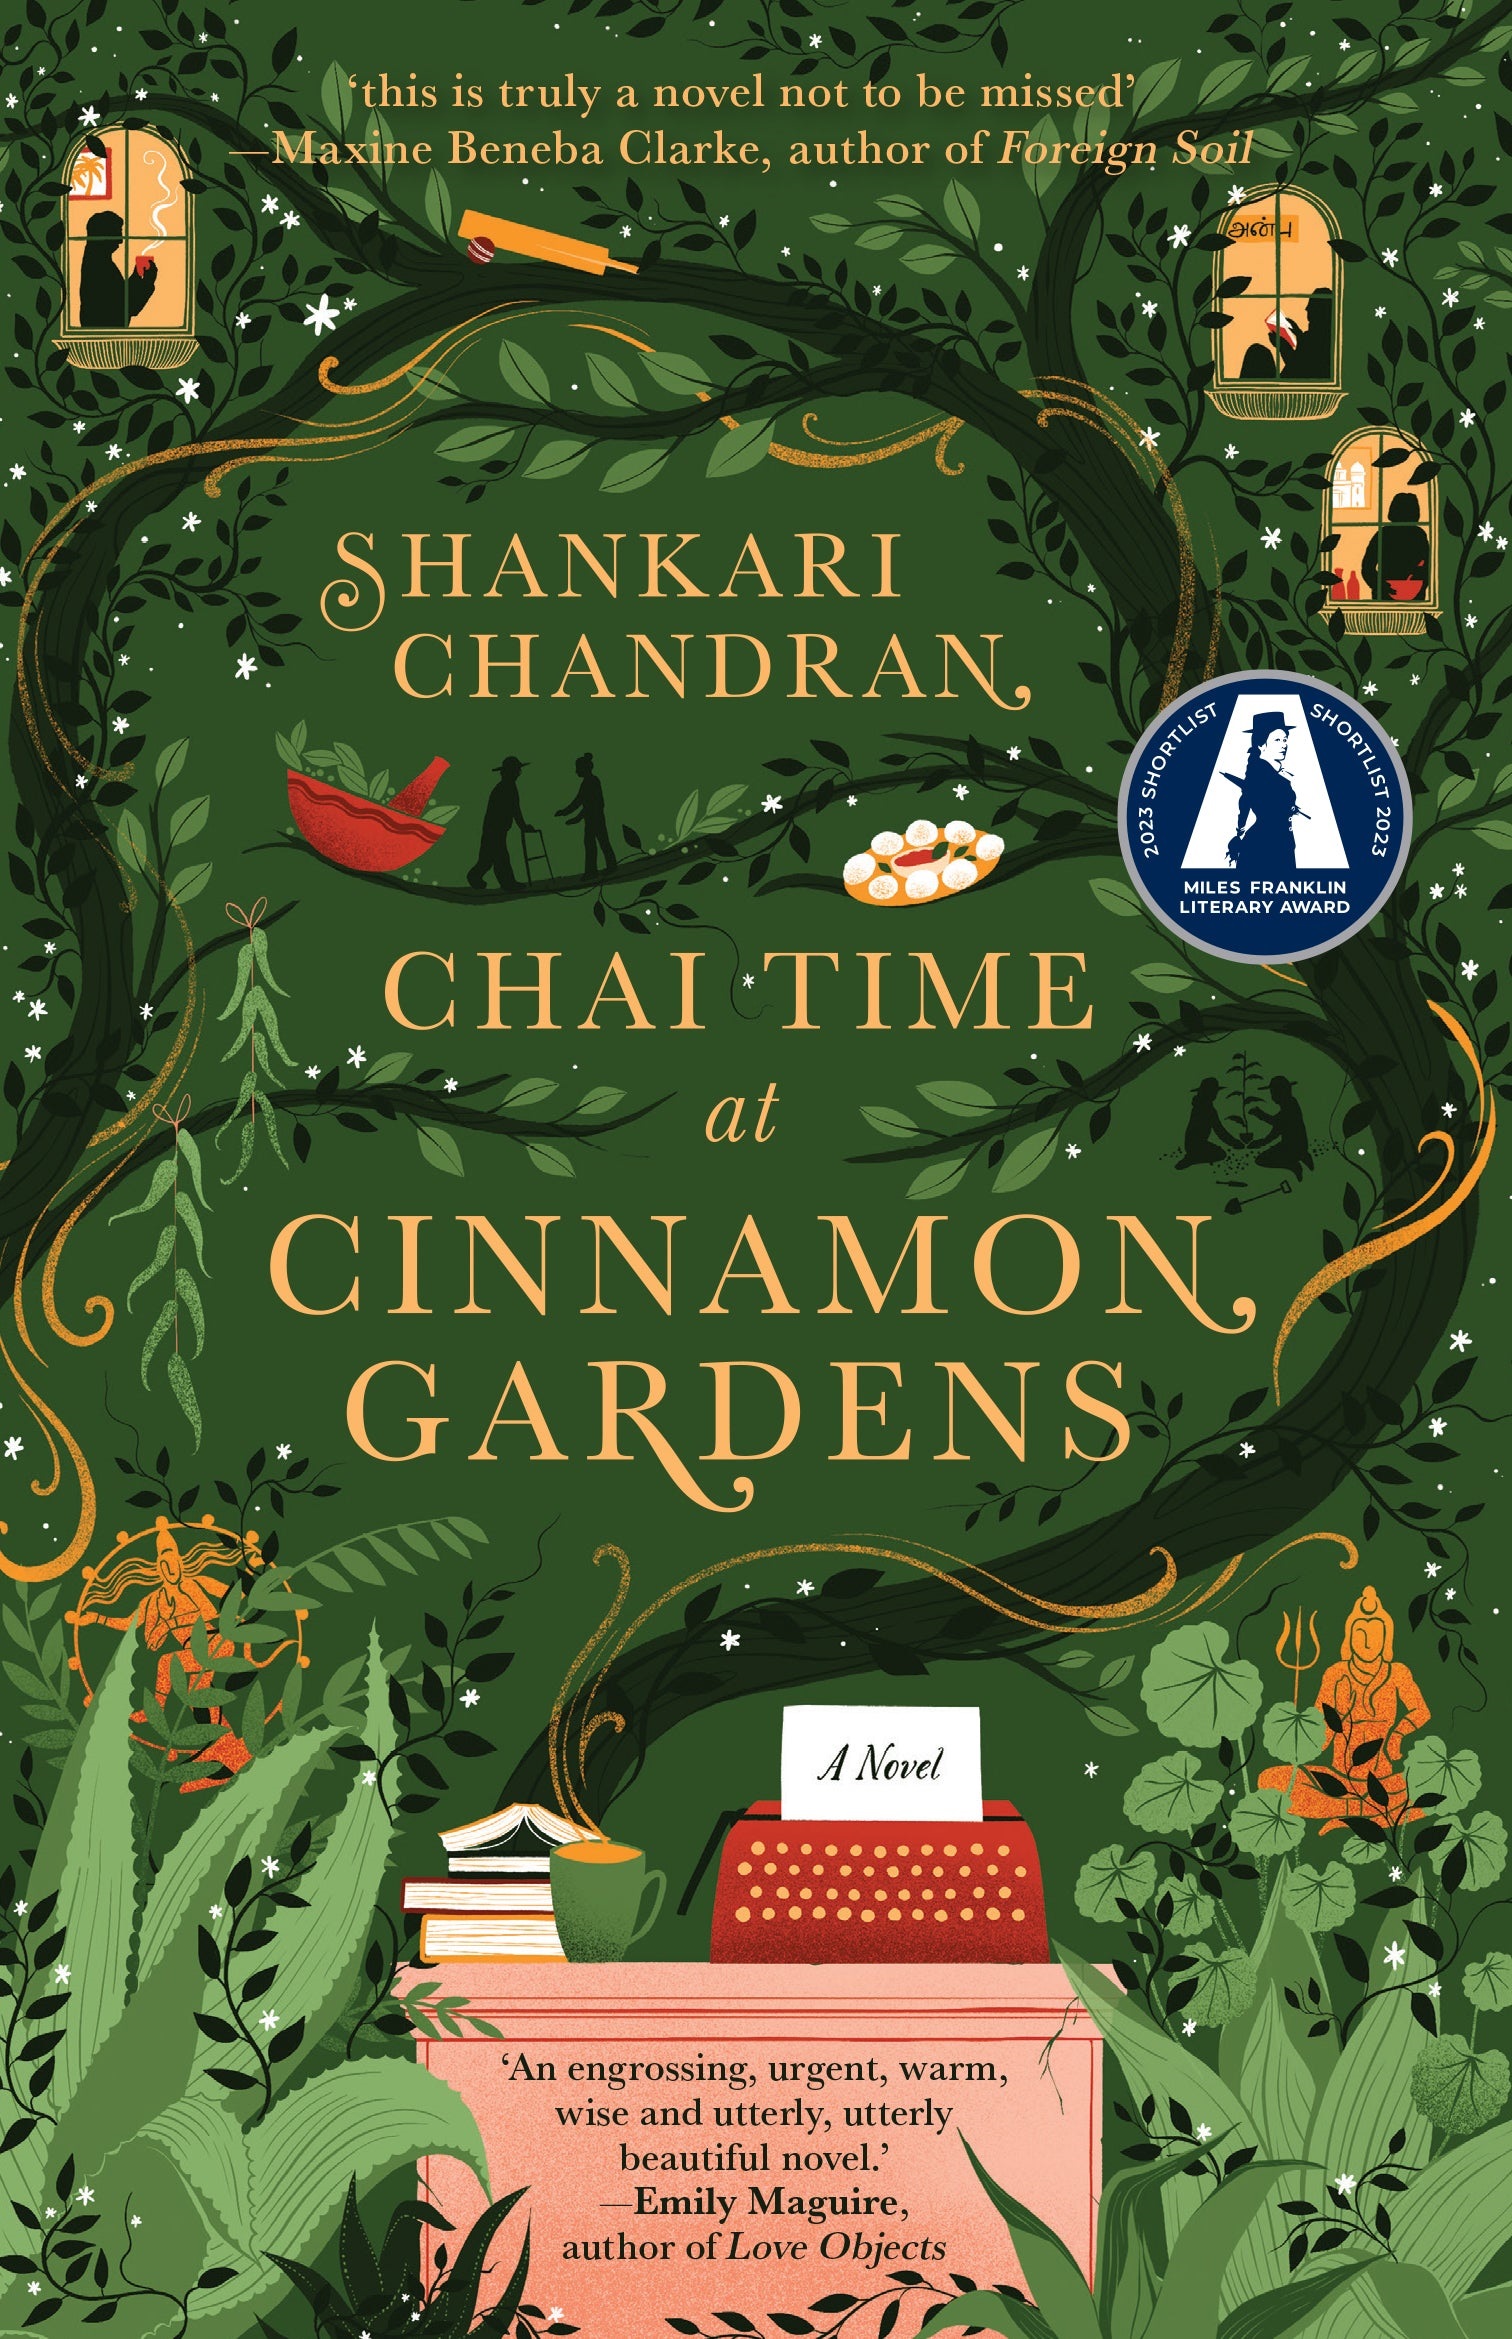 A book cover showing a green background and a whimsical illustration of a garden, winding vines, and open windows